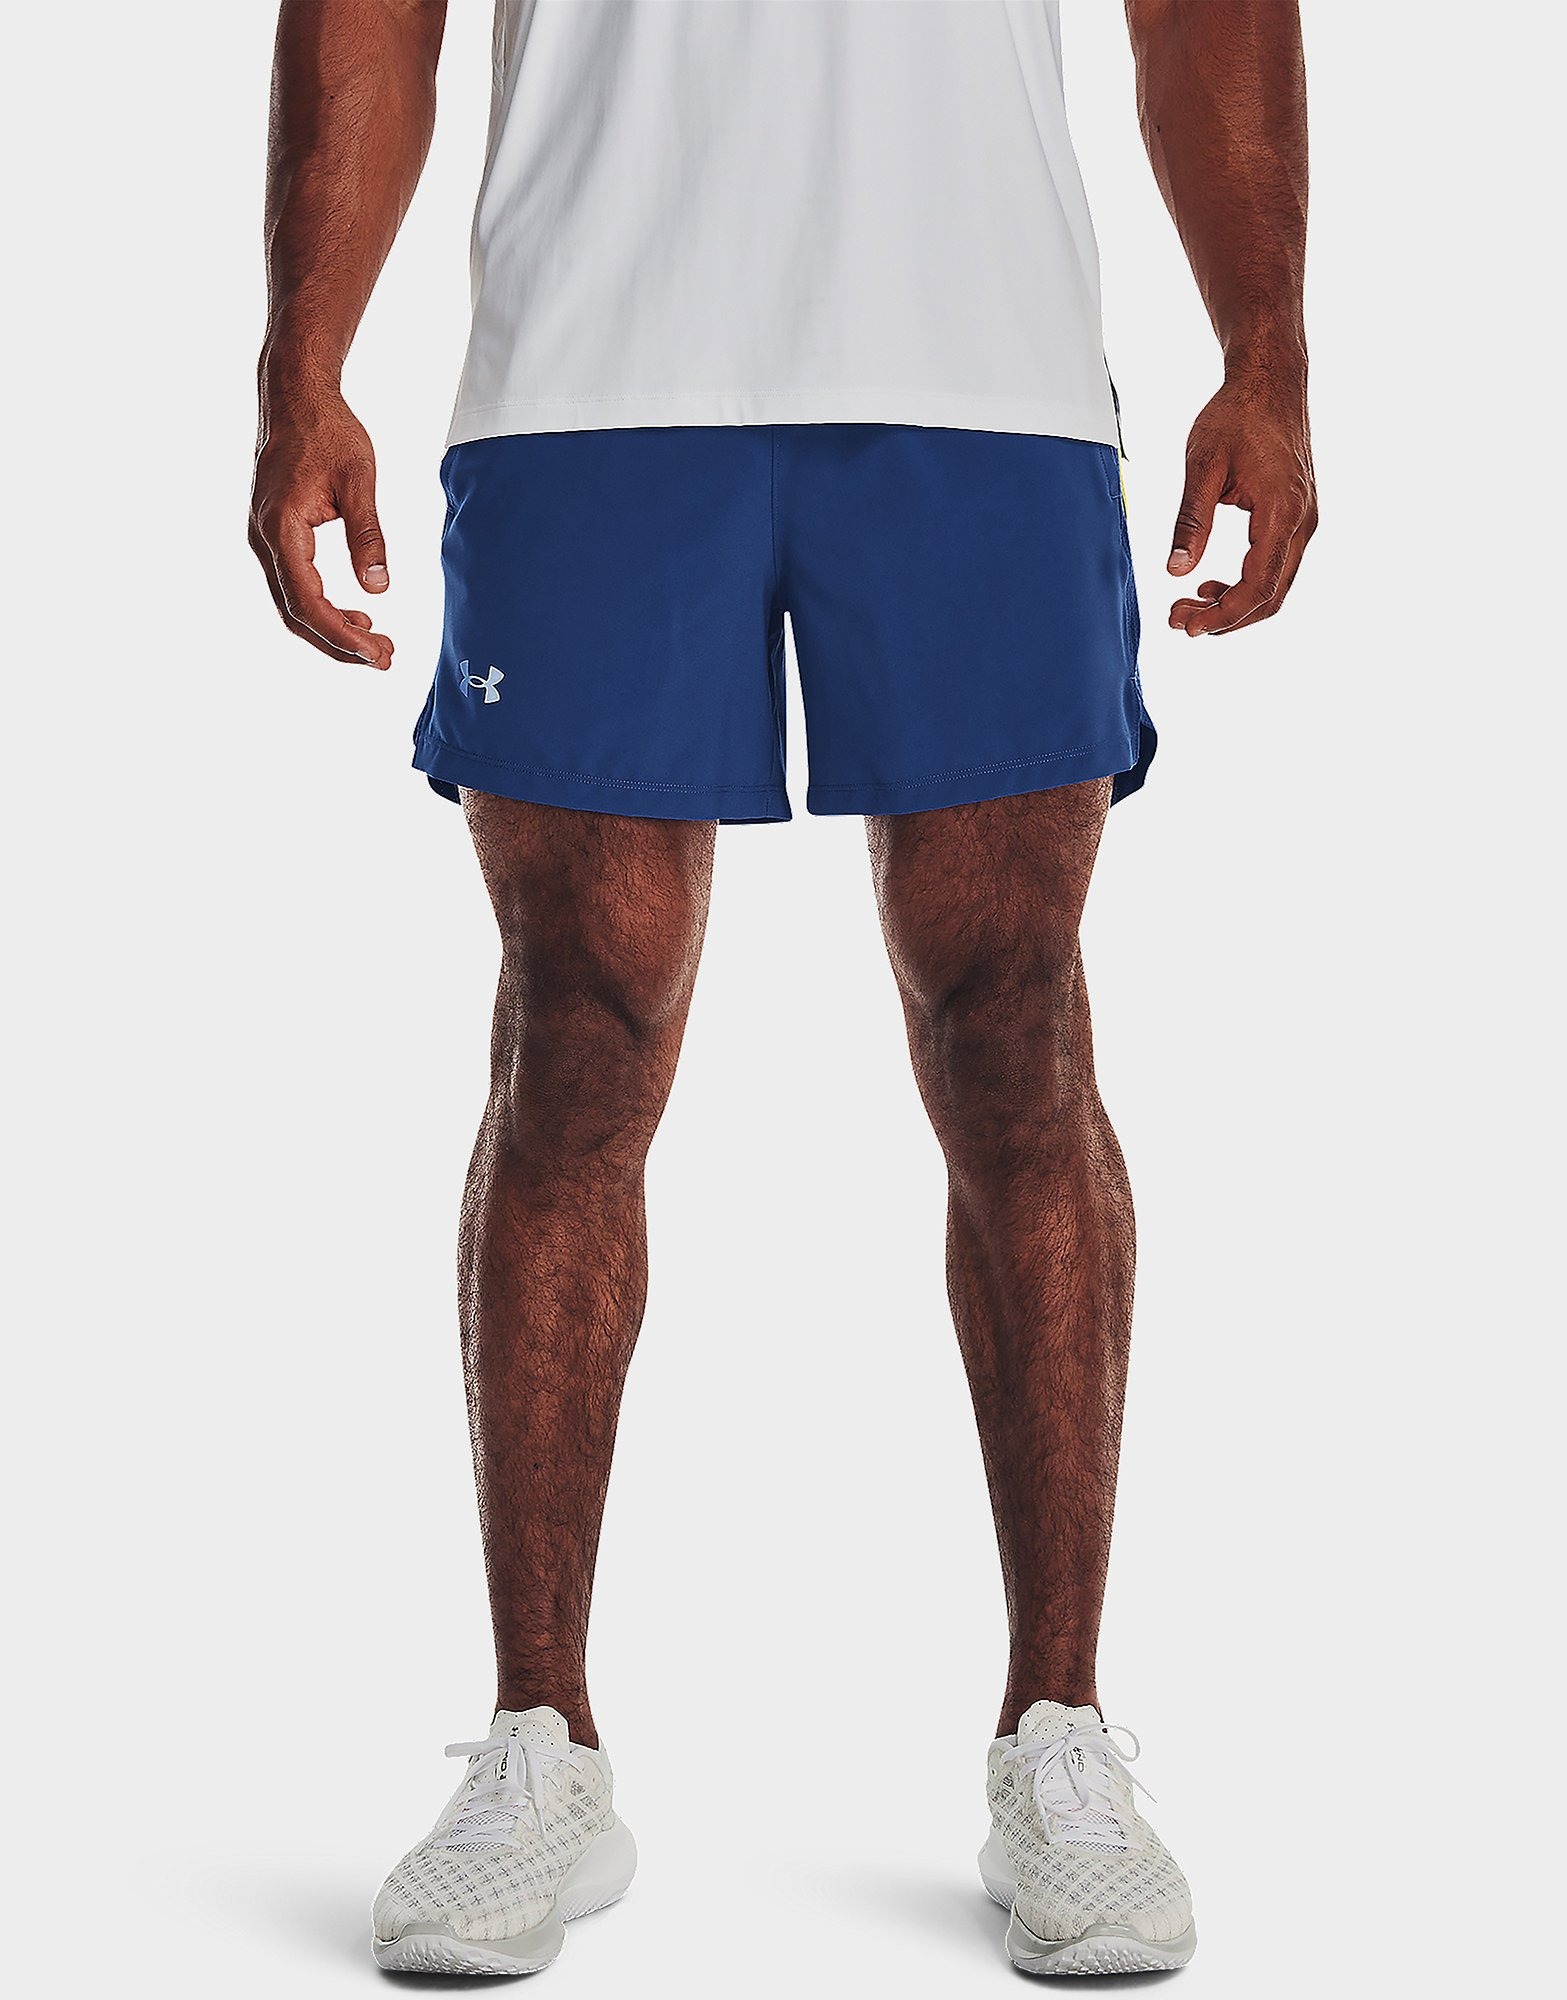 Empuje hacia abajo Sinis altura Under Armour Launch 5 Shorts | JD Sports UK